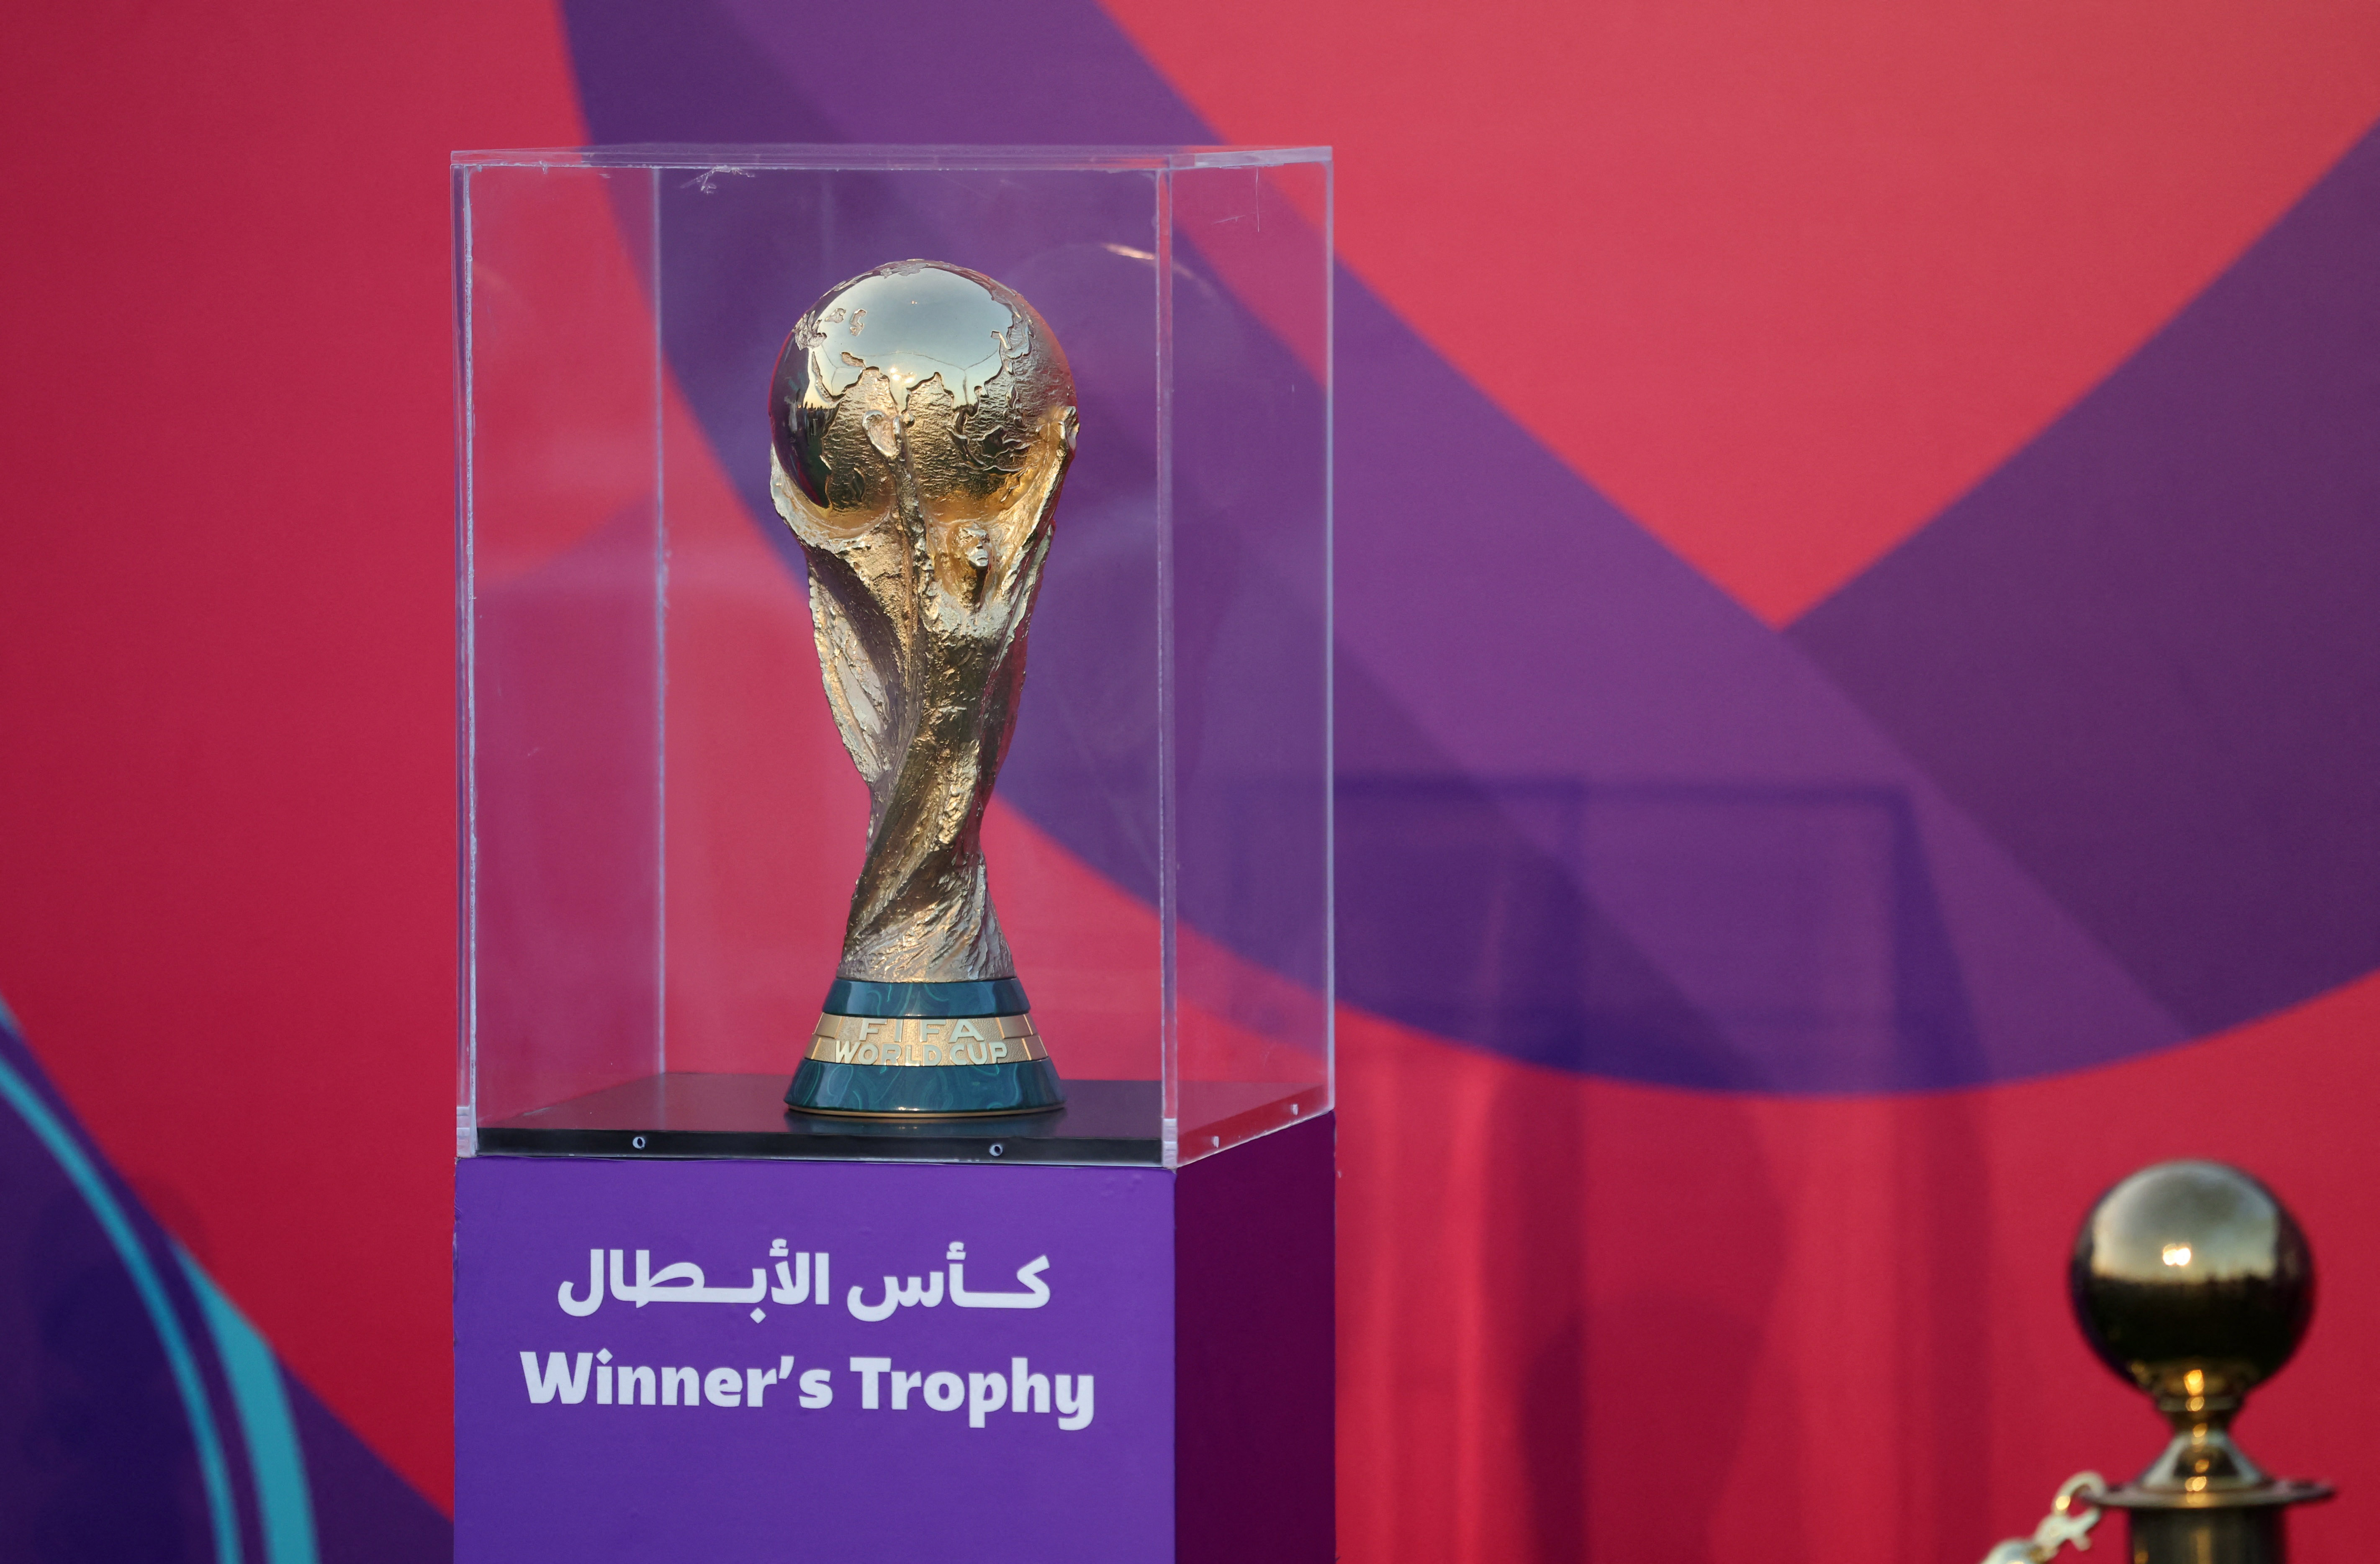 Soccer Football - FIFA World Cup Qatar 2022 - The World Cup trophy goes on display at Aspire Park - Doha, Qatar - November 15, 2022 The World Cup trophy on display during the event REUTERS/Carl Recine